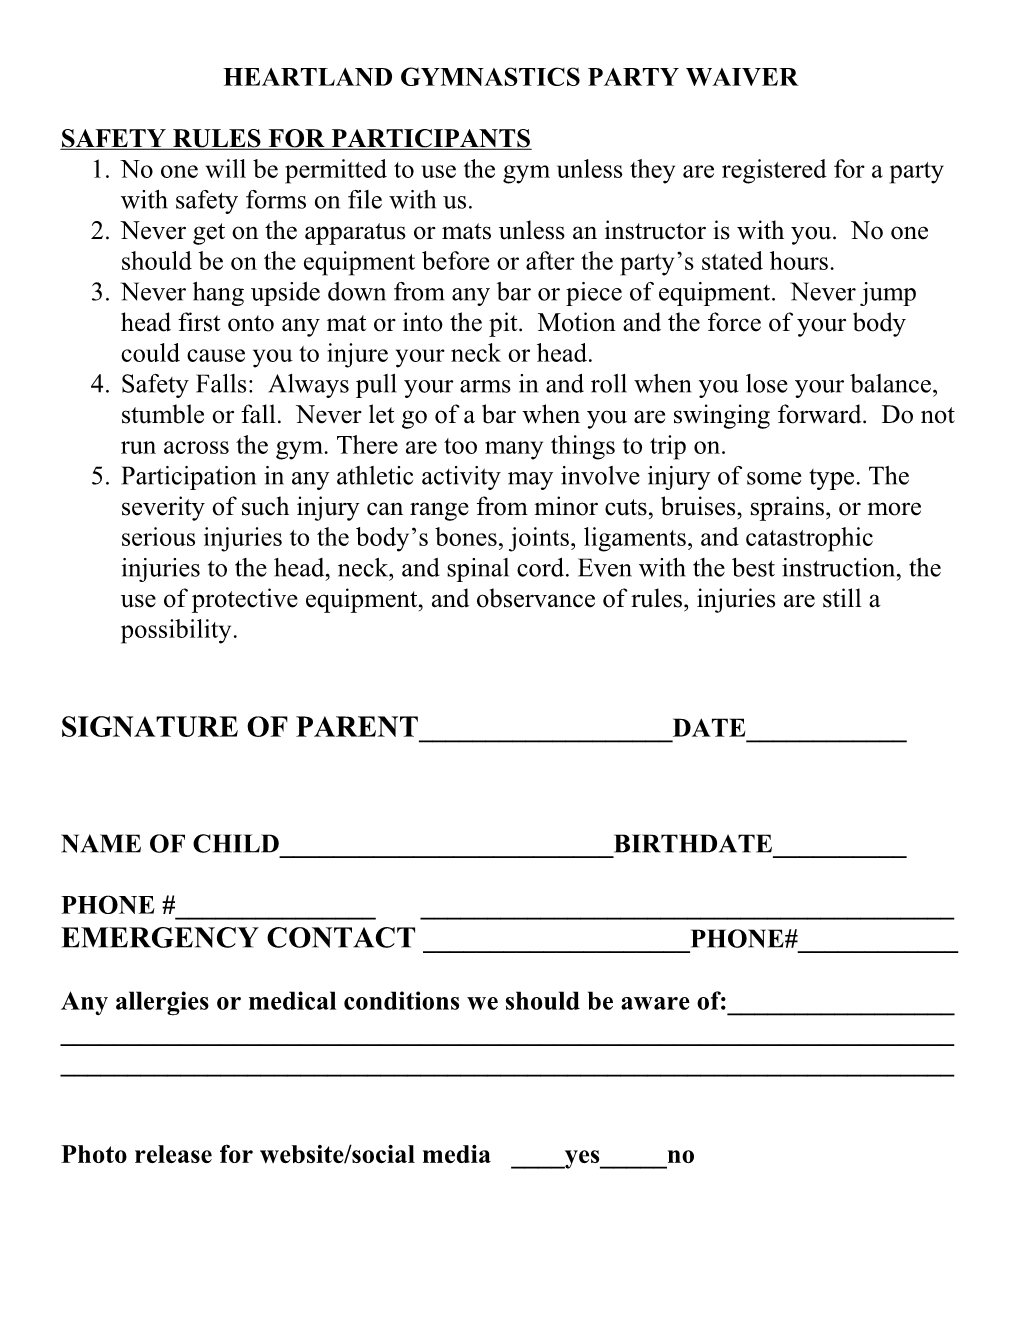 Heartland Athletic Club Party Waiver